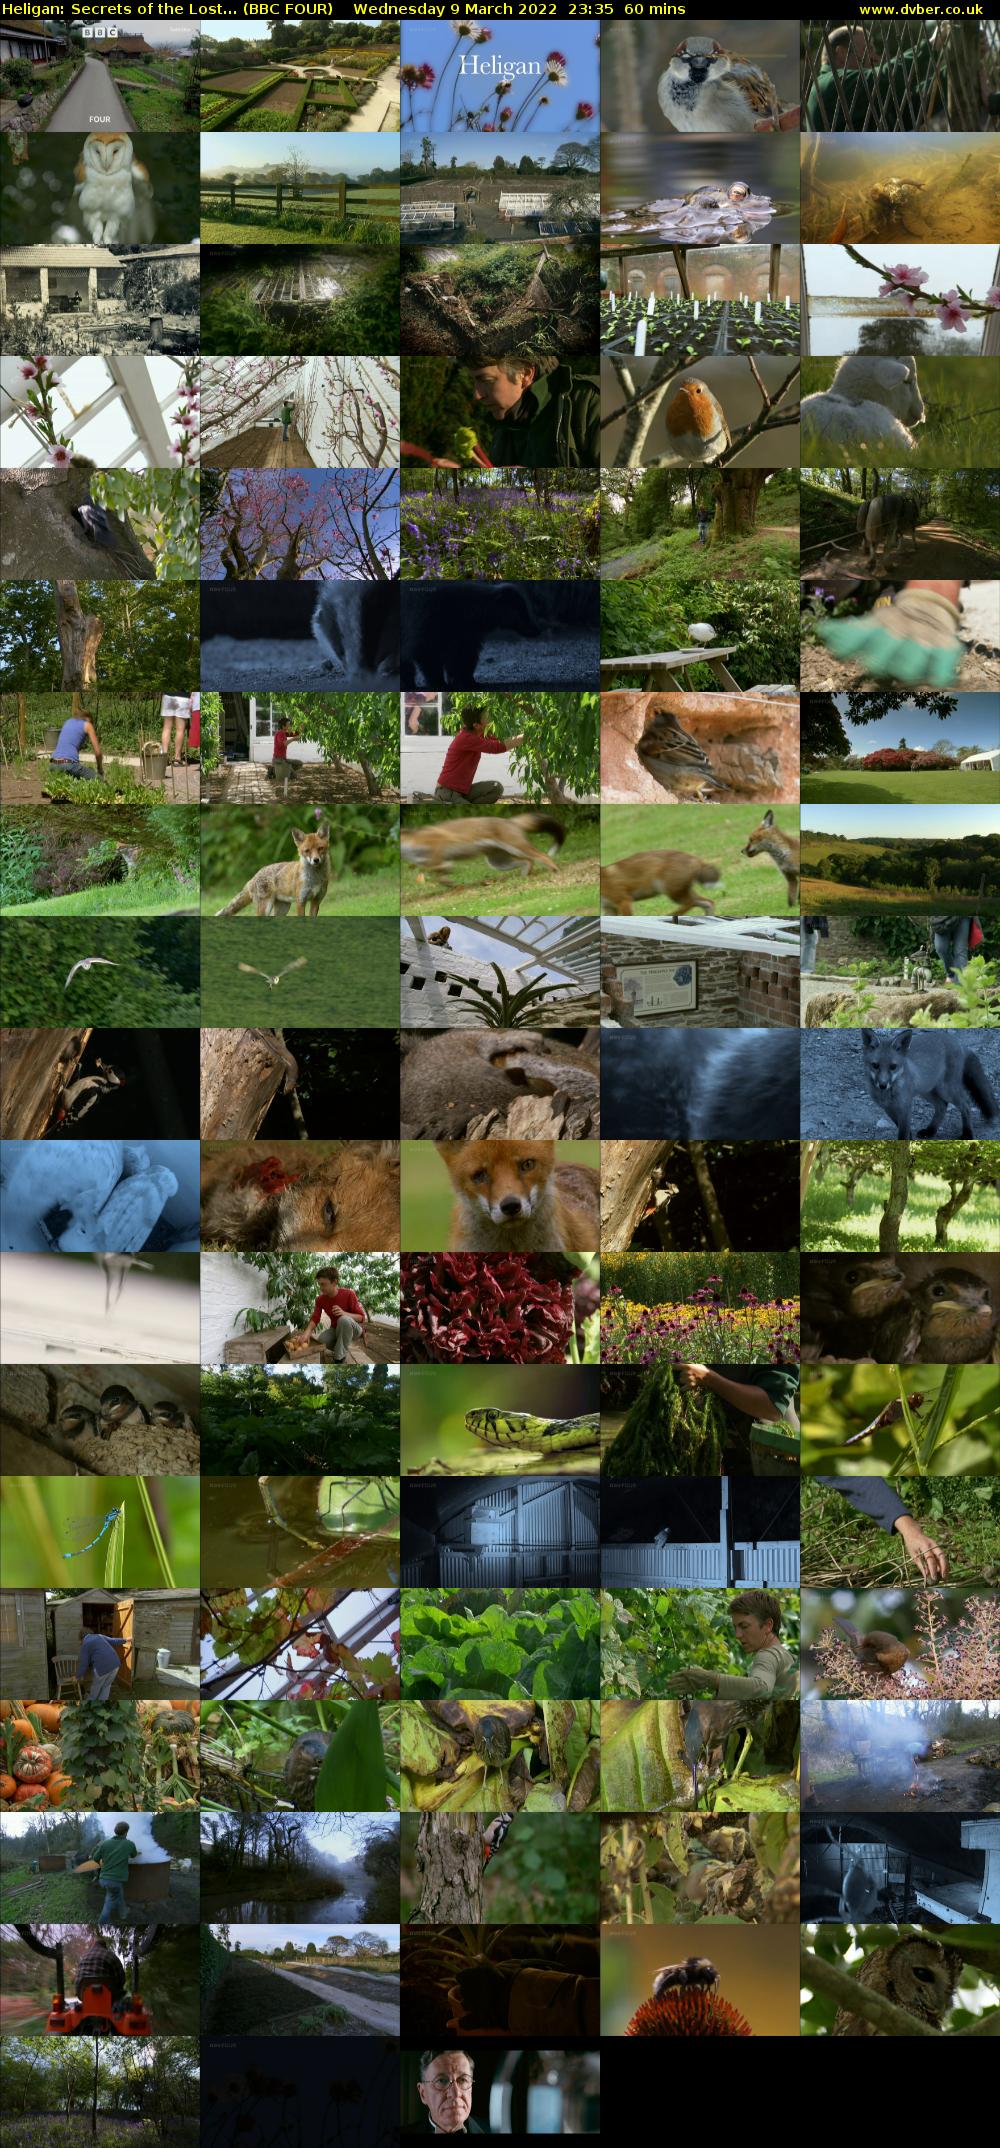 Heligan: Secrets of the Lost... (BBC FOUR) Wednesday 9 March 2022 23:35 - 00:35